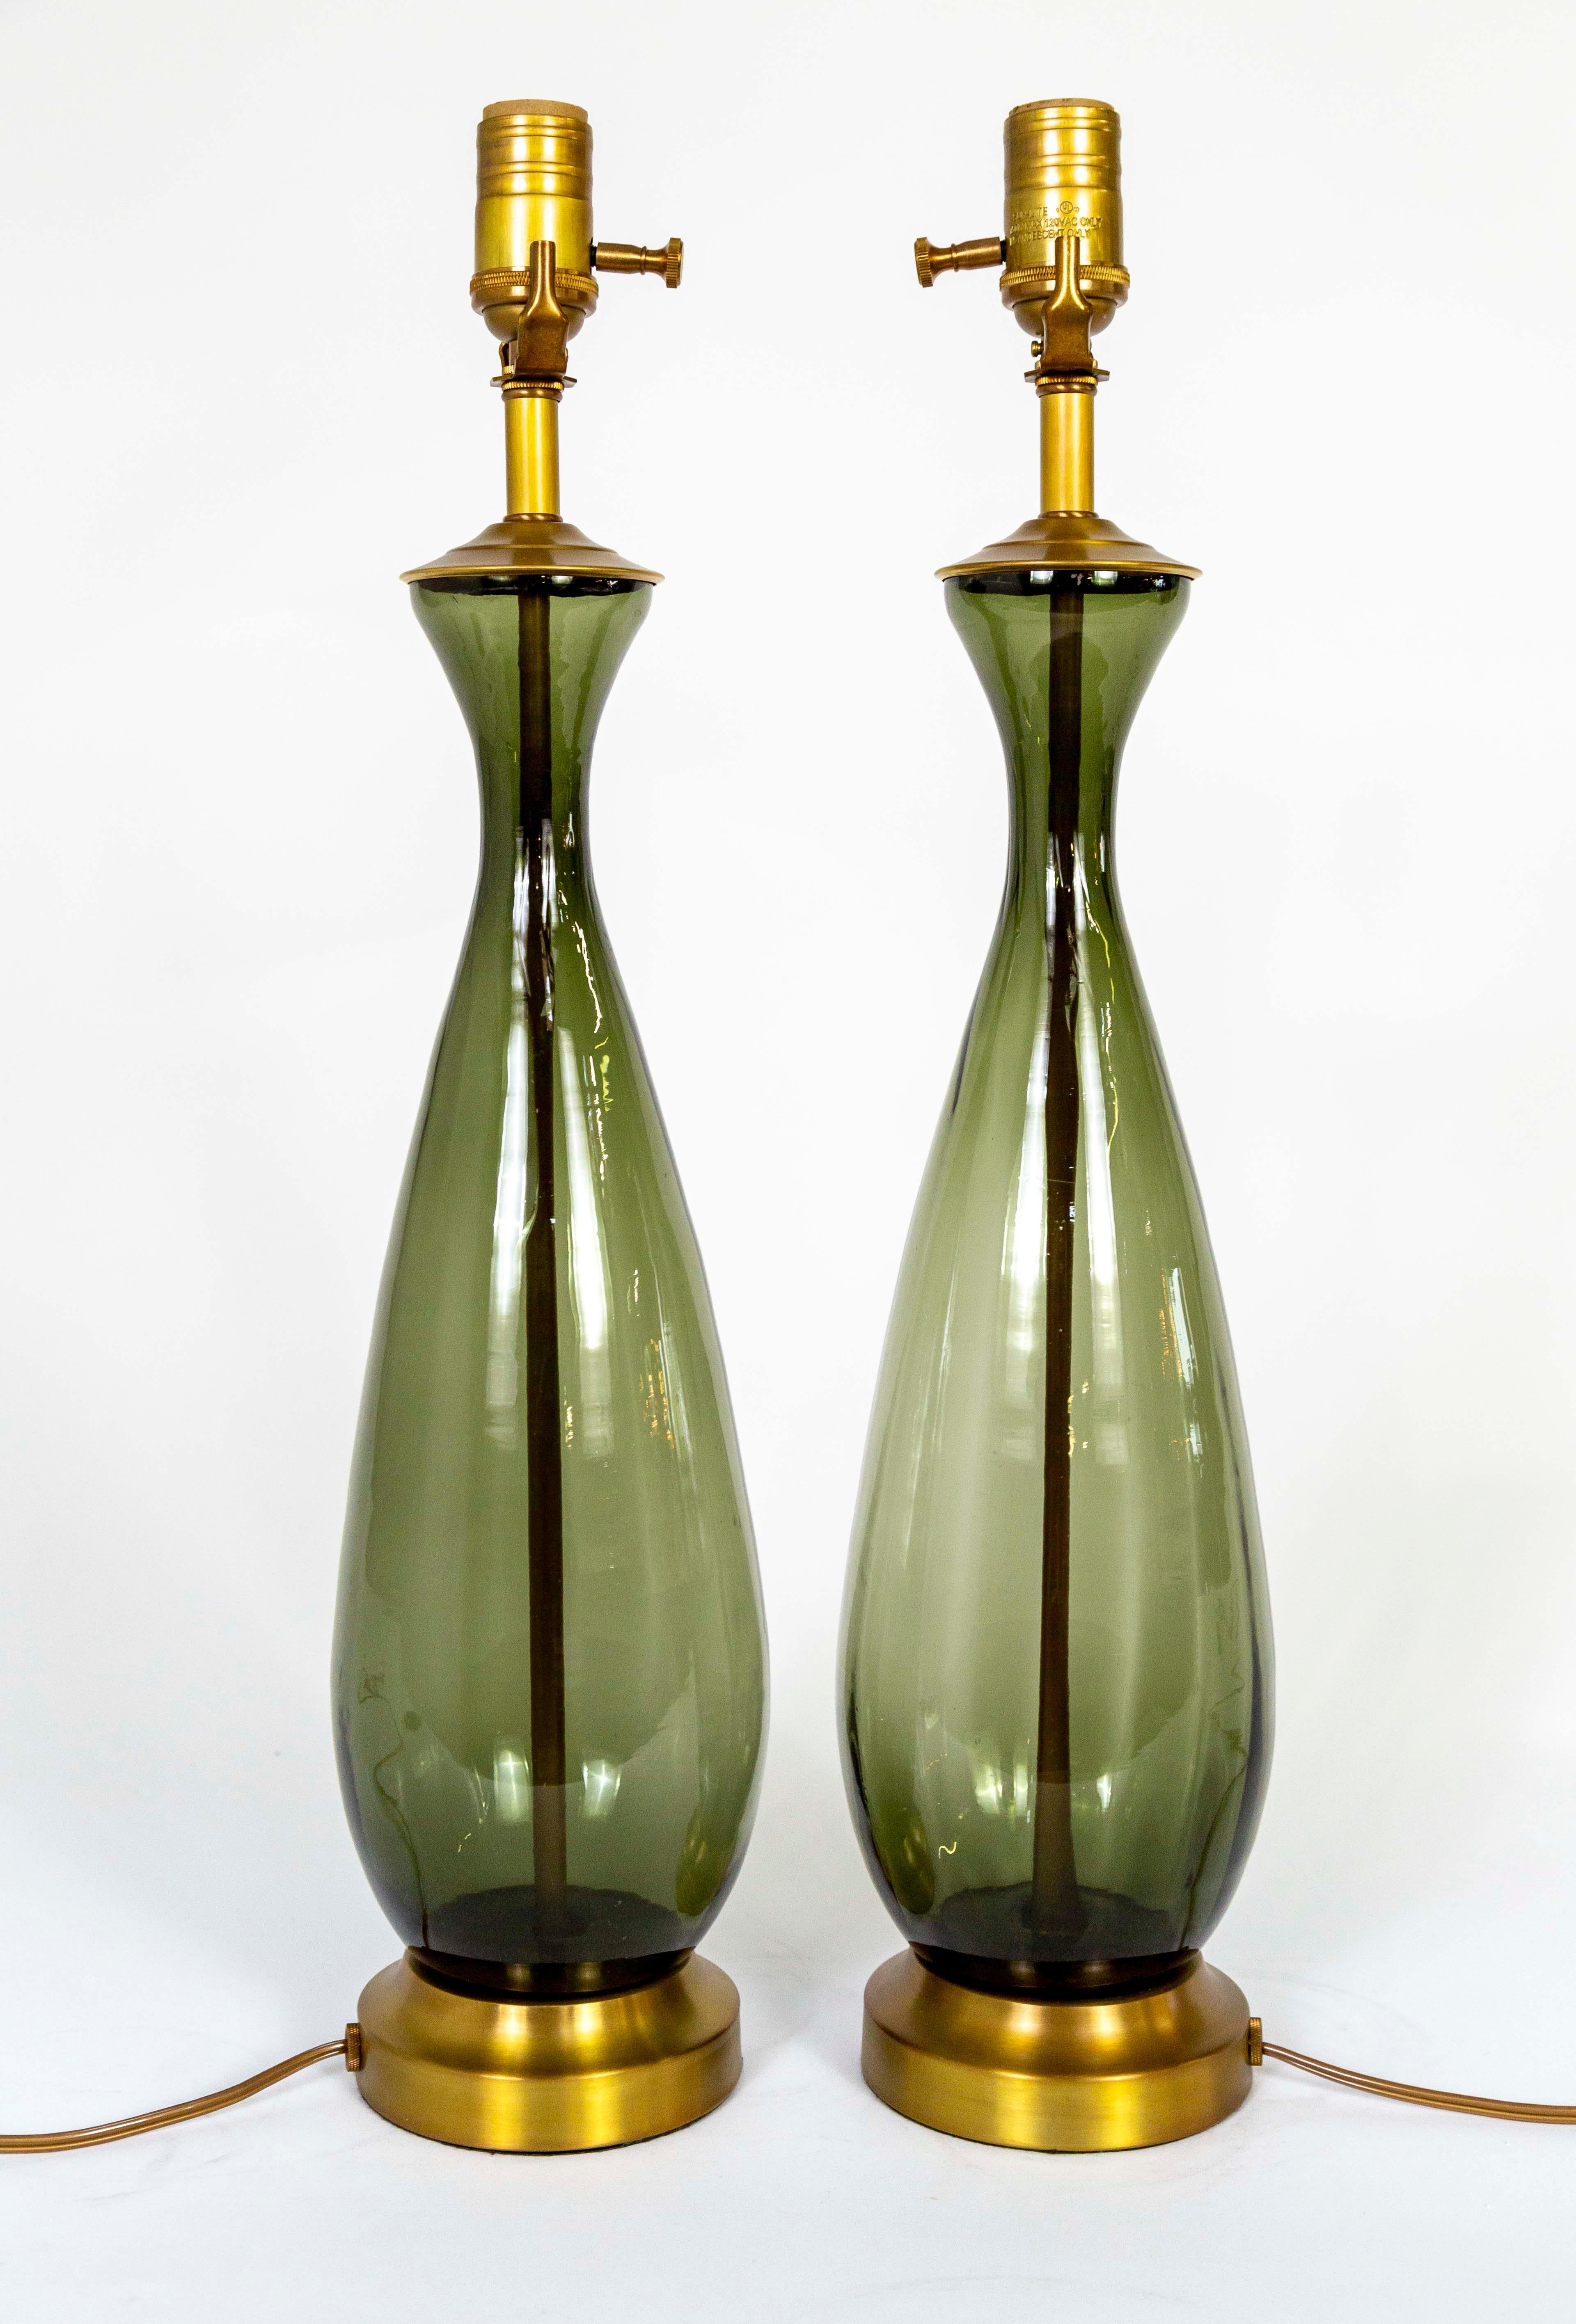 A pair of vintage, Murano glass table lamps in a unique, transparent, smoke gray-green color and elegant drop shape with subtle ribs. Refashioned with new brass bases, caps, stem, and sockets. Newly wired with dimmers on the sockets. Circa 1950. 5